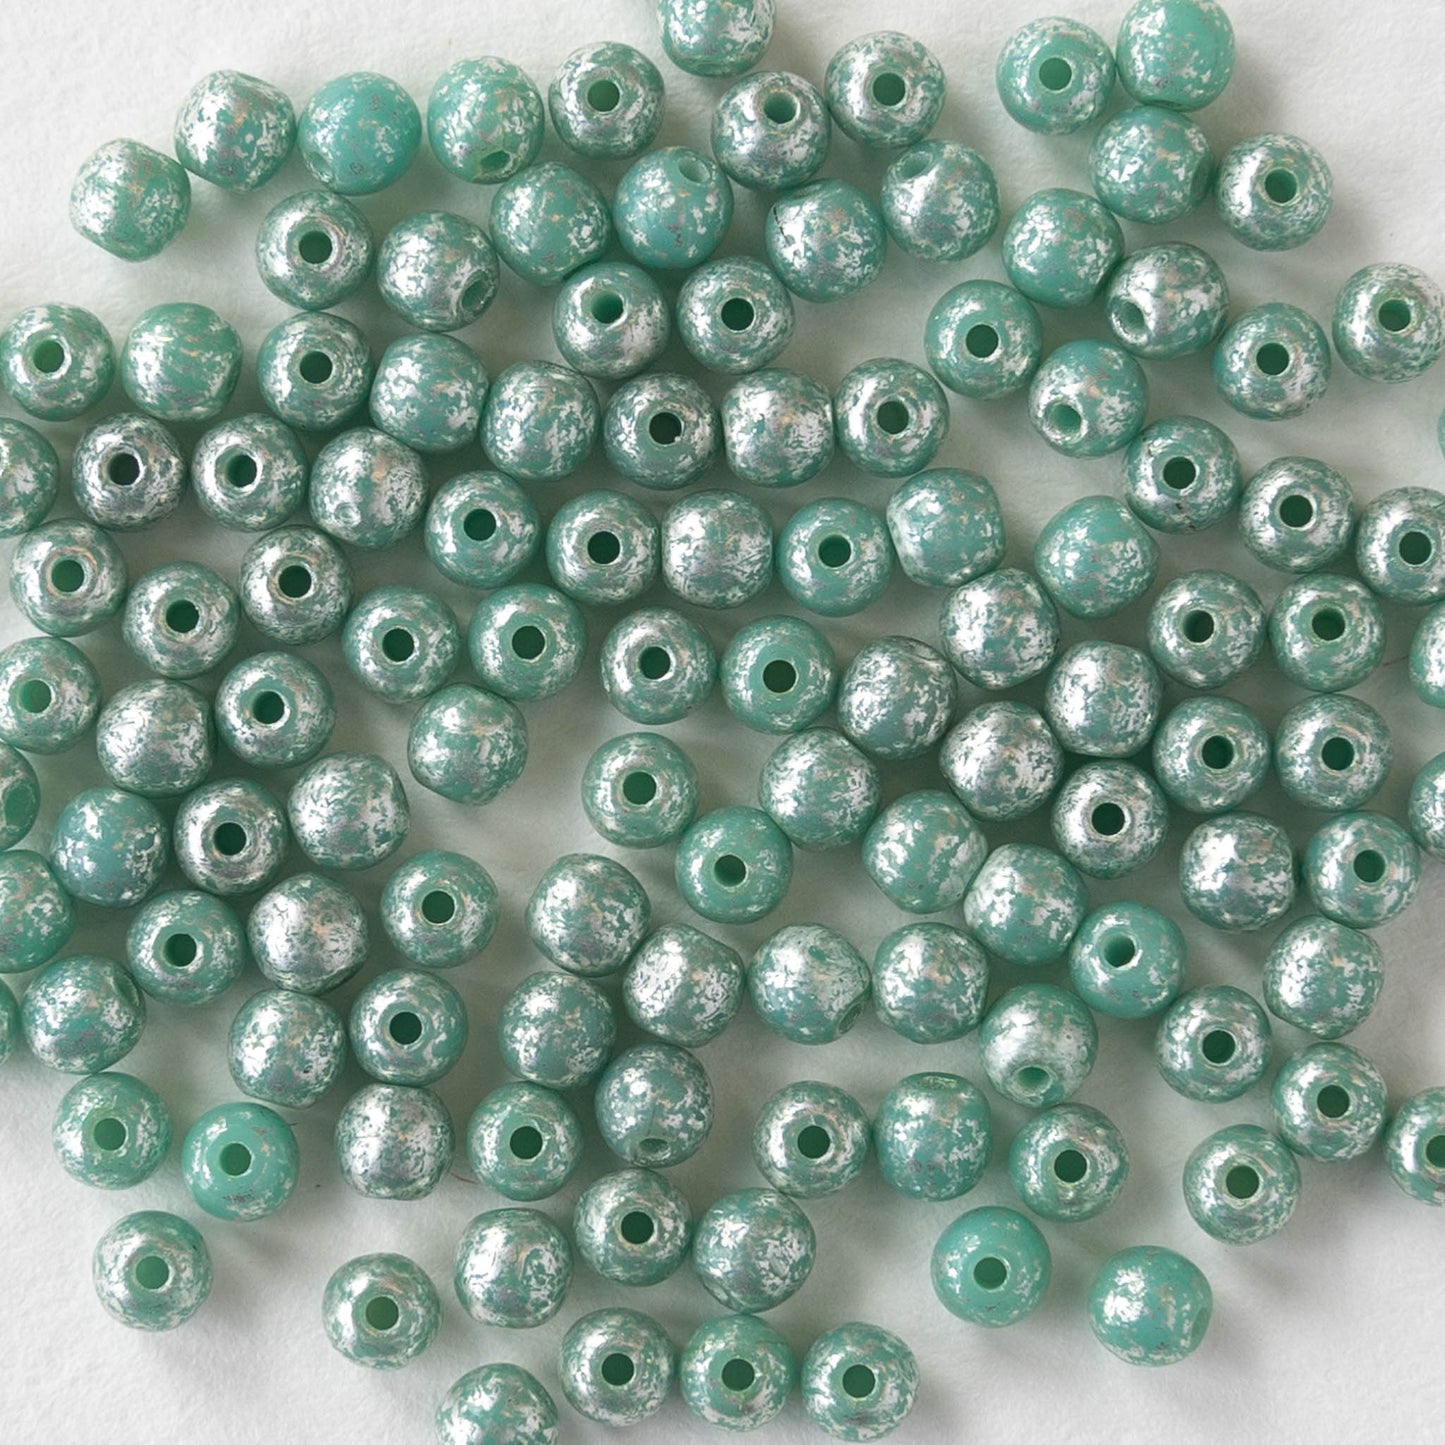 4mm Round Glass Beads - Mint Green with Gold Finish - 50 Beads